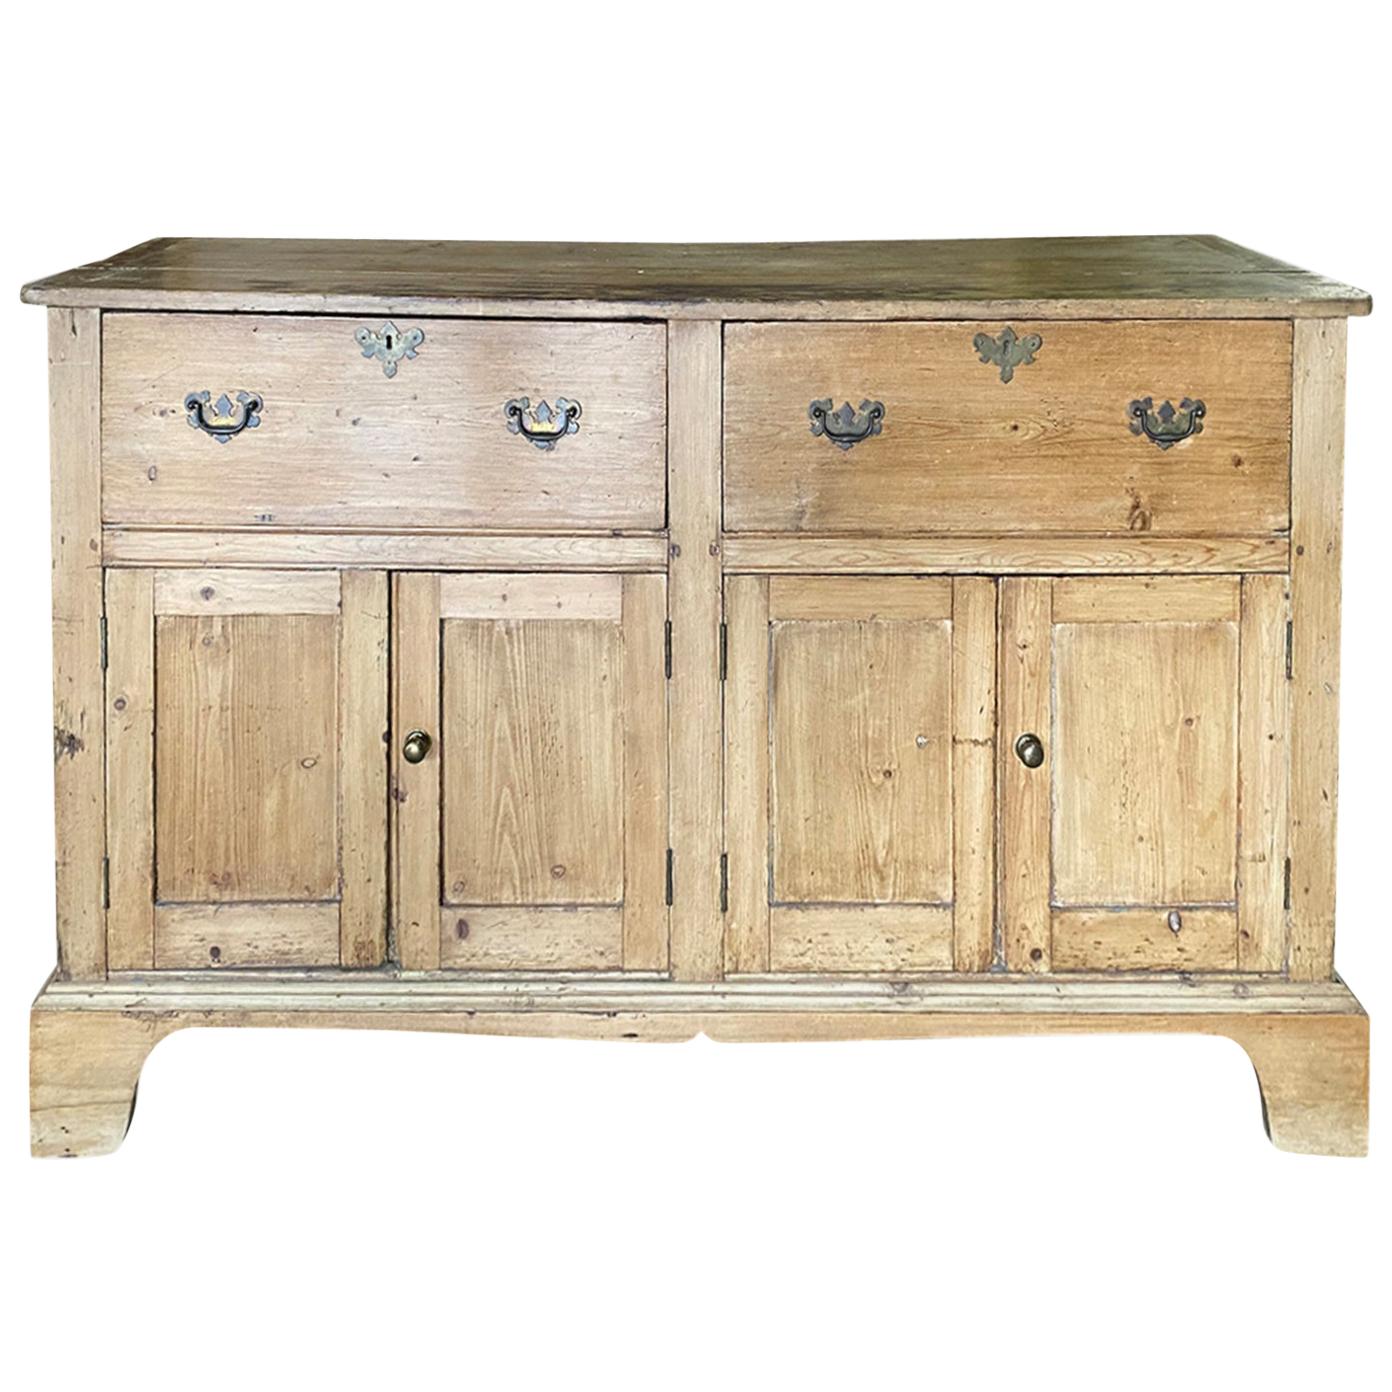 19th Century Welsh Pine Dresser Base with 4 Doors, 2 Drawers